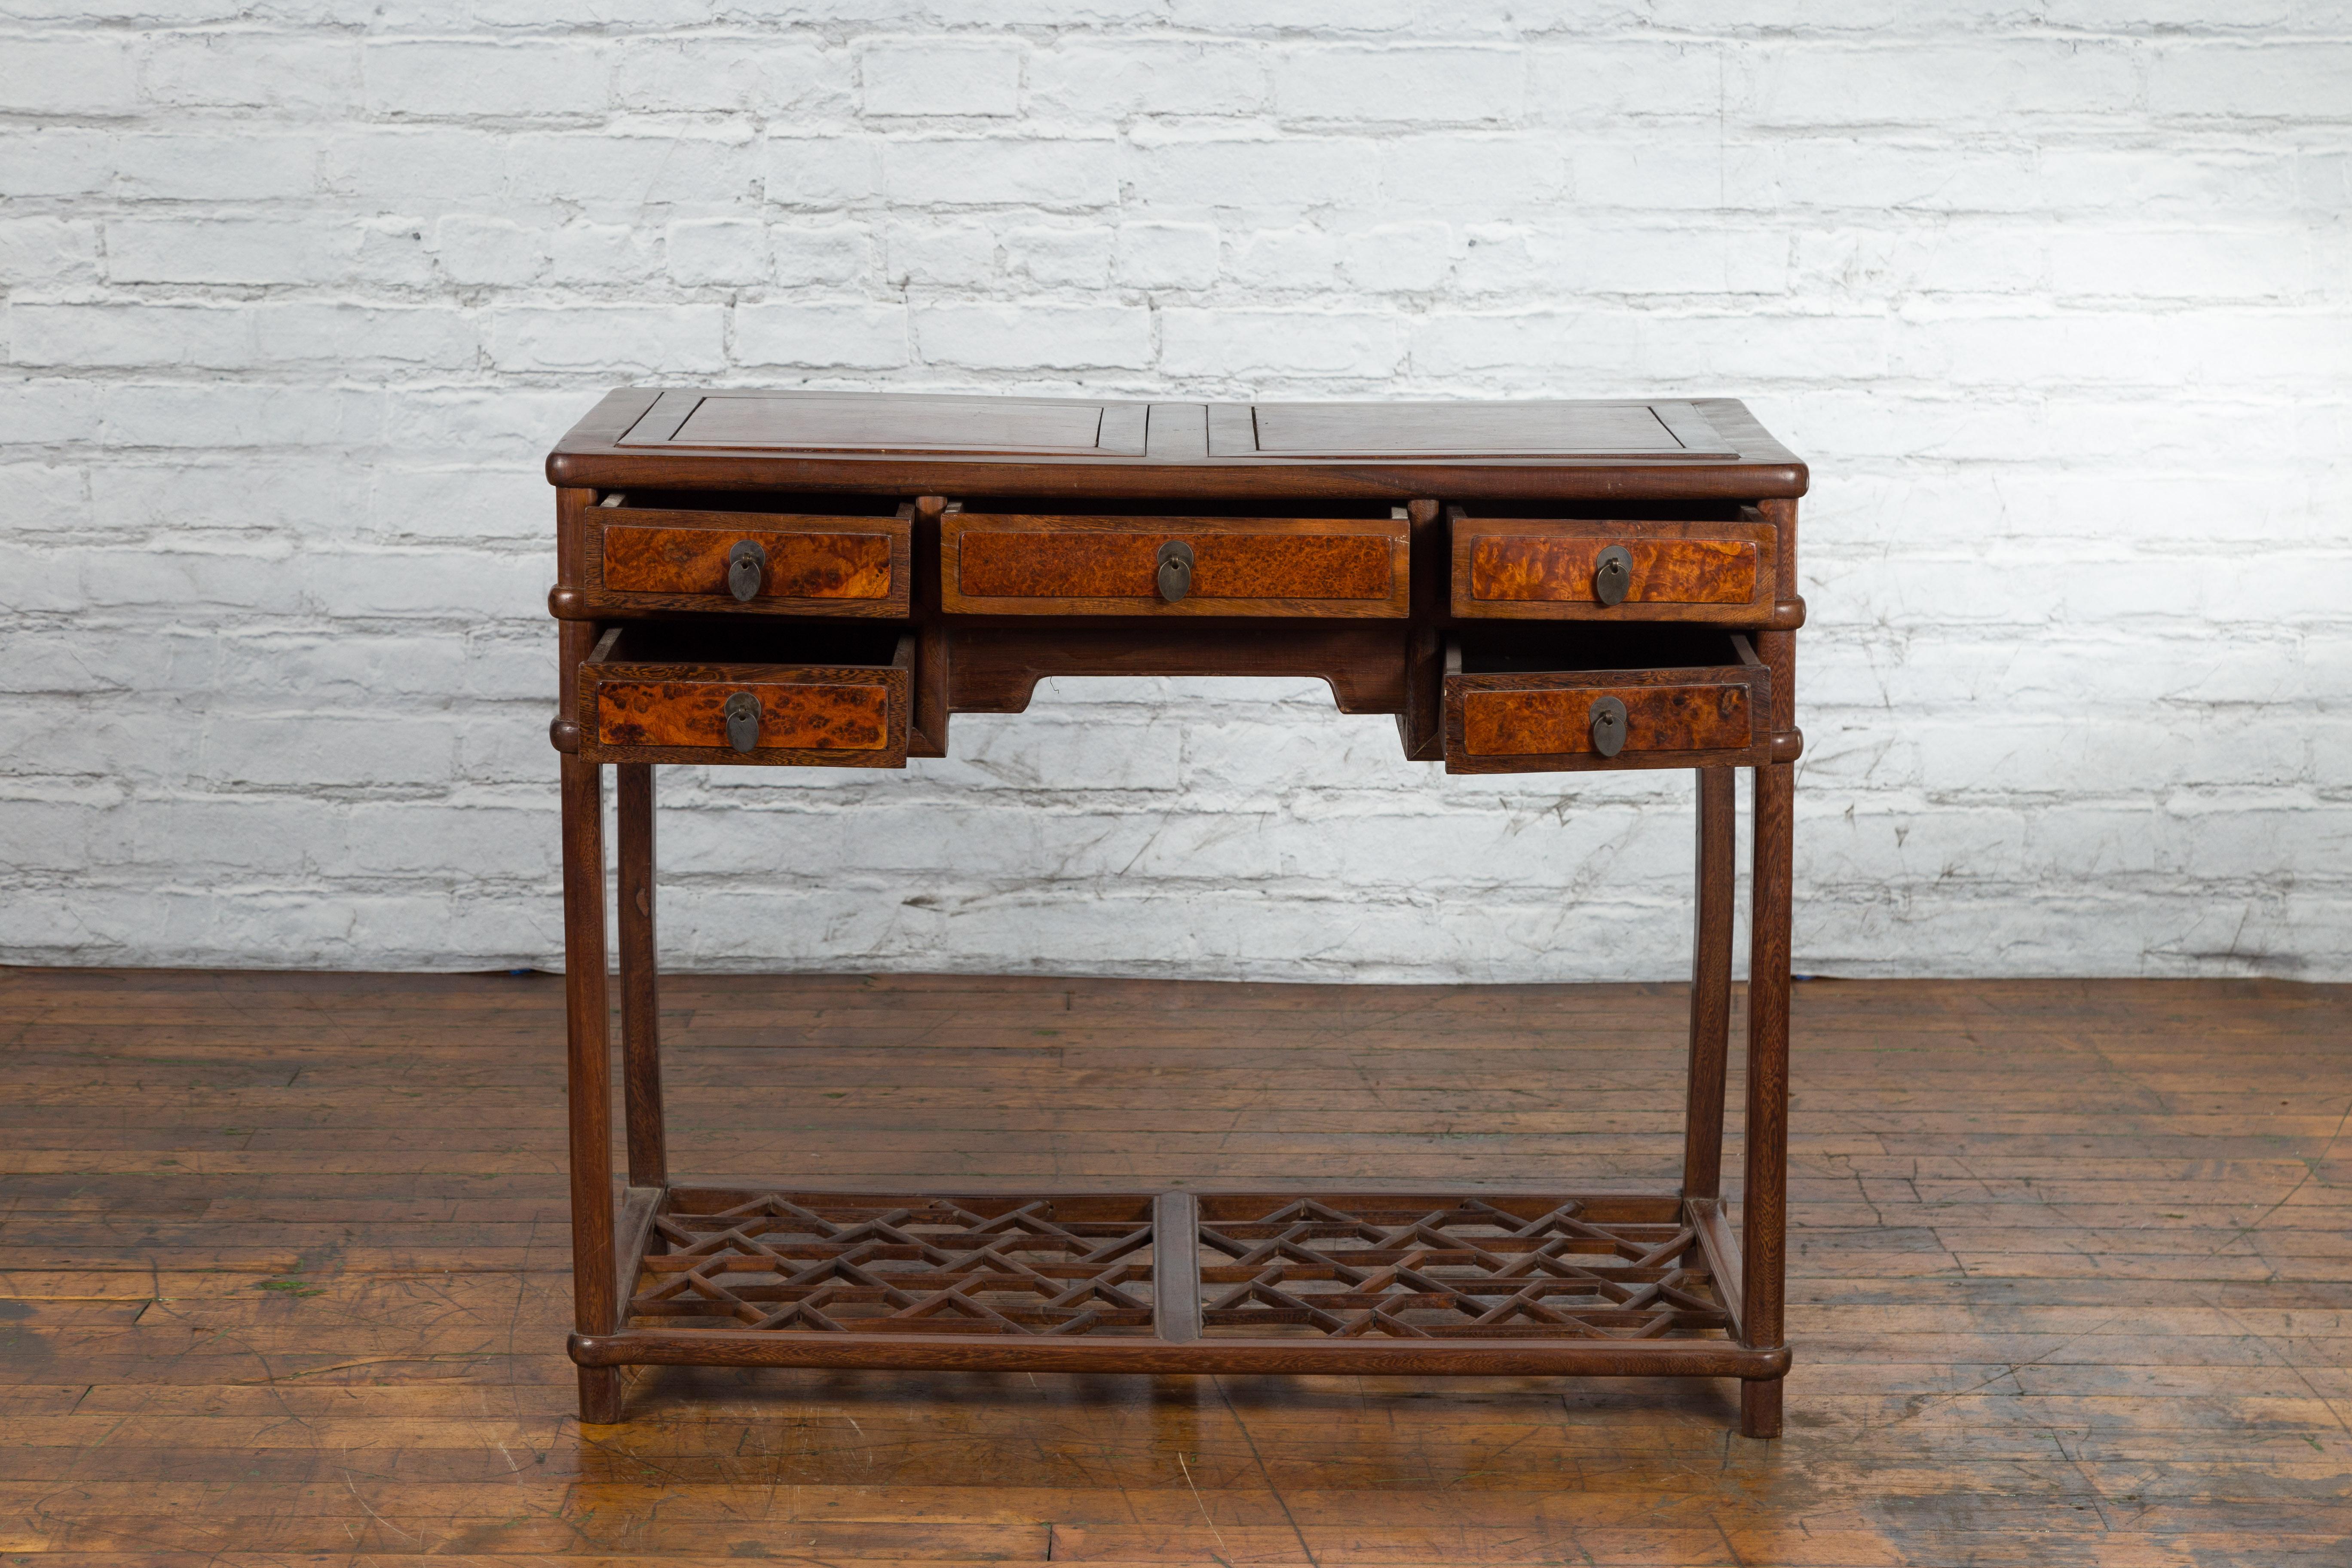 Fretwork Qing Dynasty 19th Century Desk with Burlwood Top, Drawers and Cracked Ice Shelf For Sale